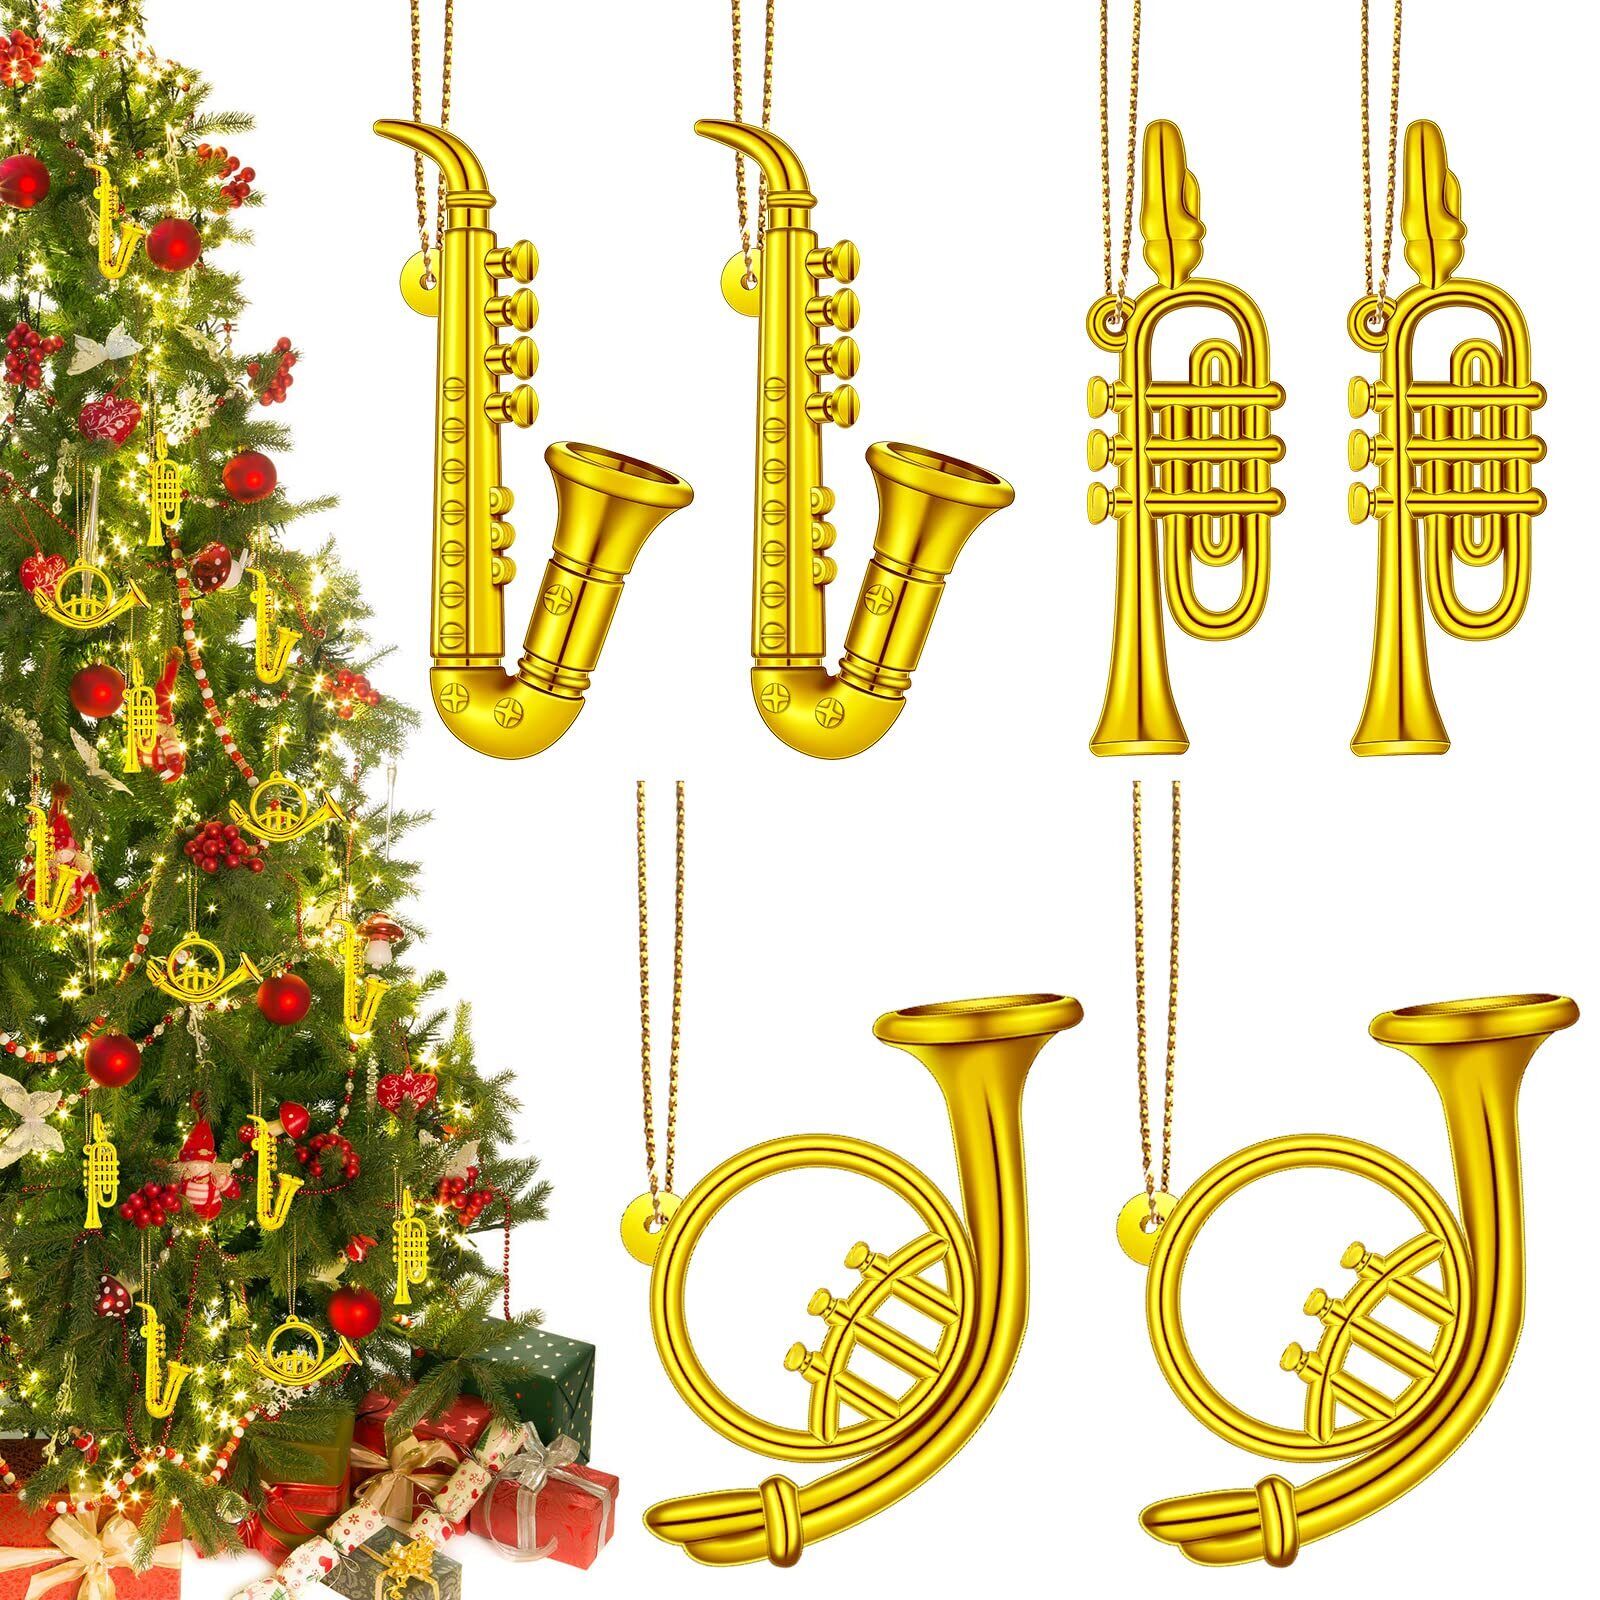 6 Pieces Musical Instruments Ornaments Christmas Musical Decoration Gold Inst...